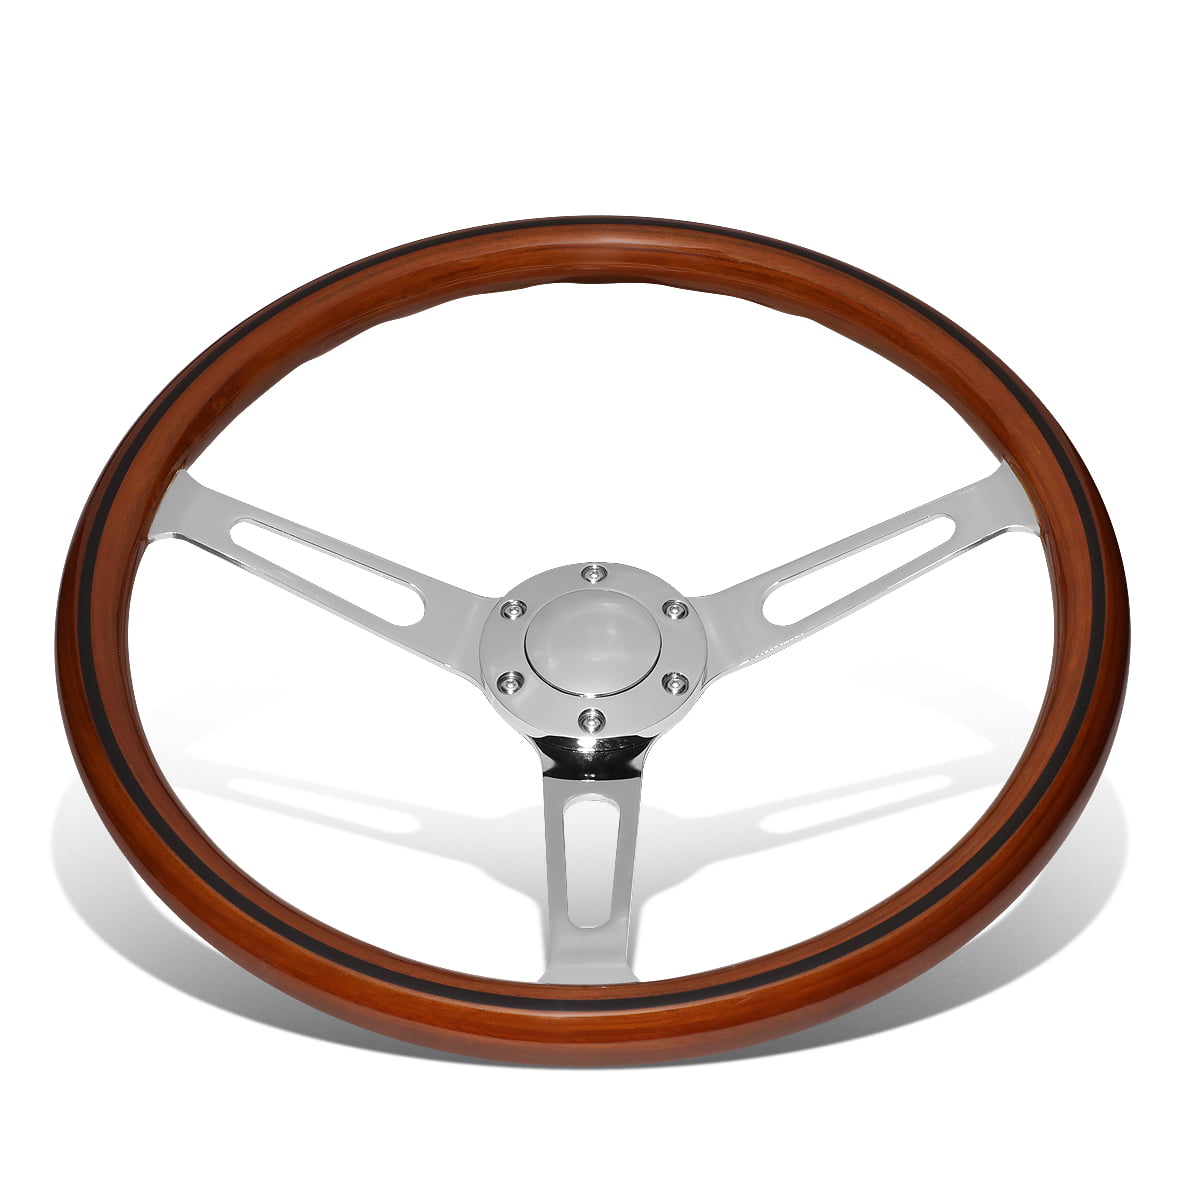 15 Inches Wood Grain Grip Vintage Steering Wheel 2 Inches Deep Dish Stainless Steel Spokes w/Horn Button 